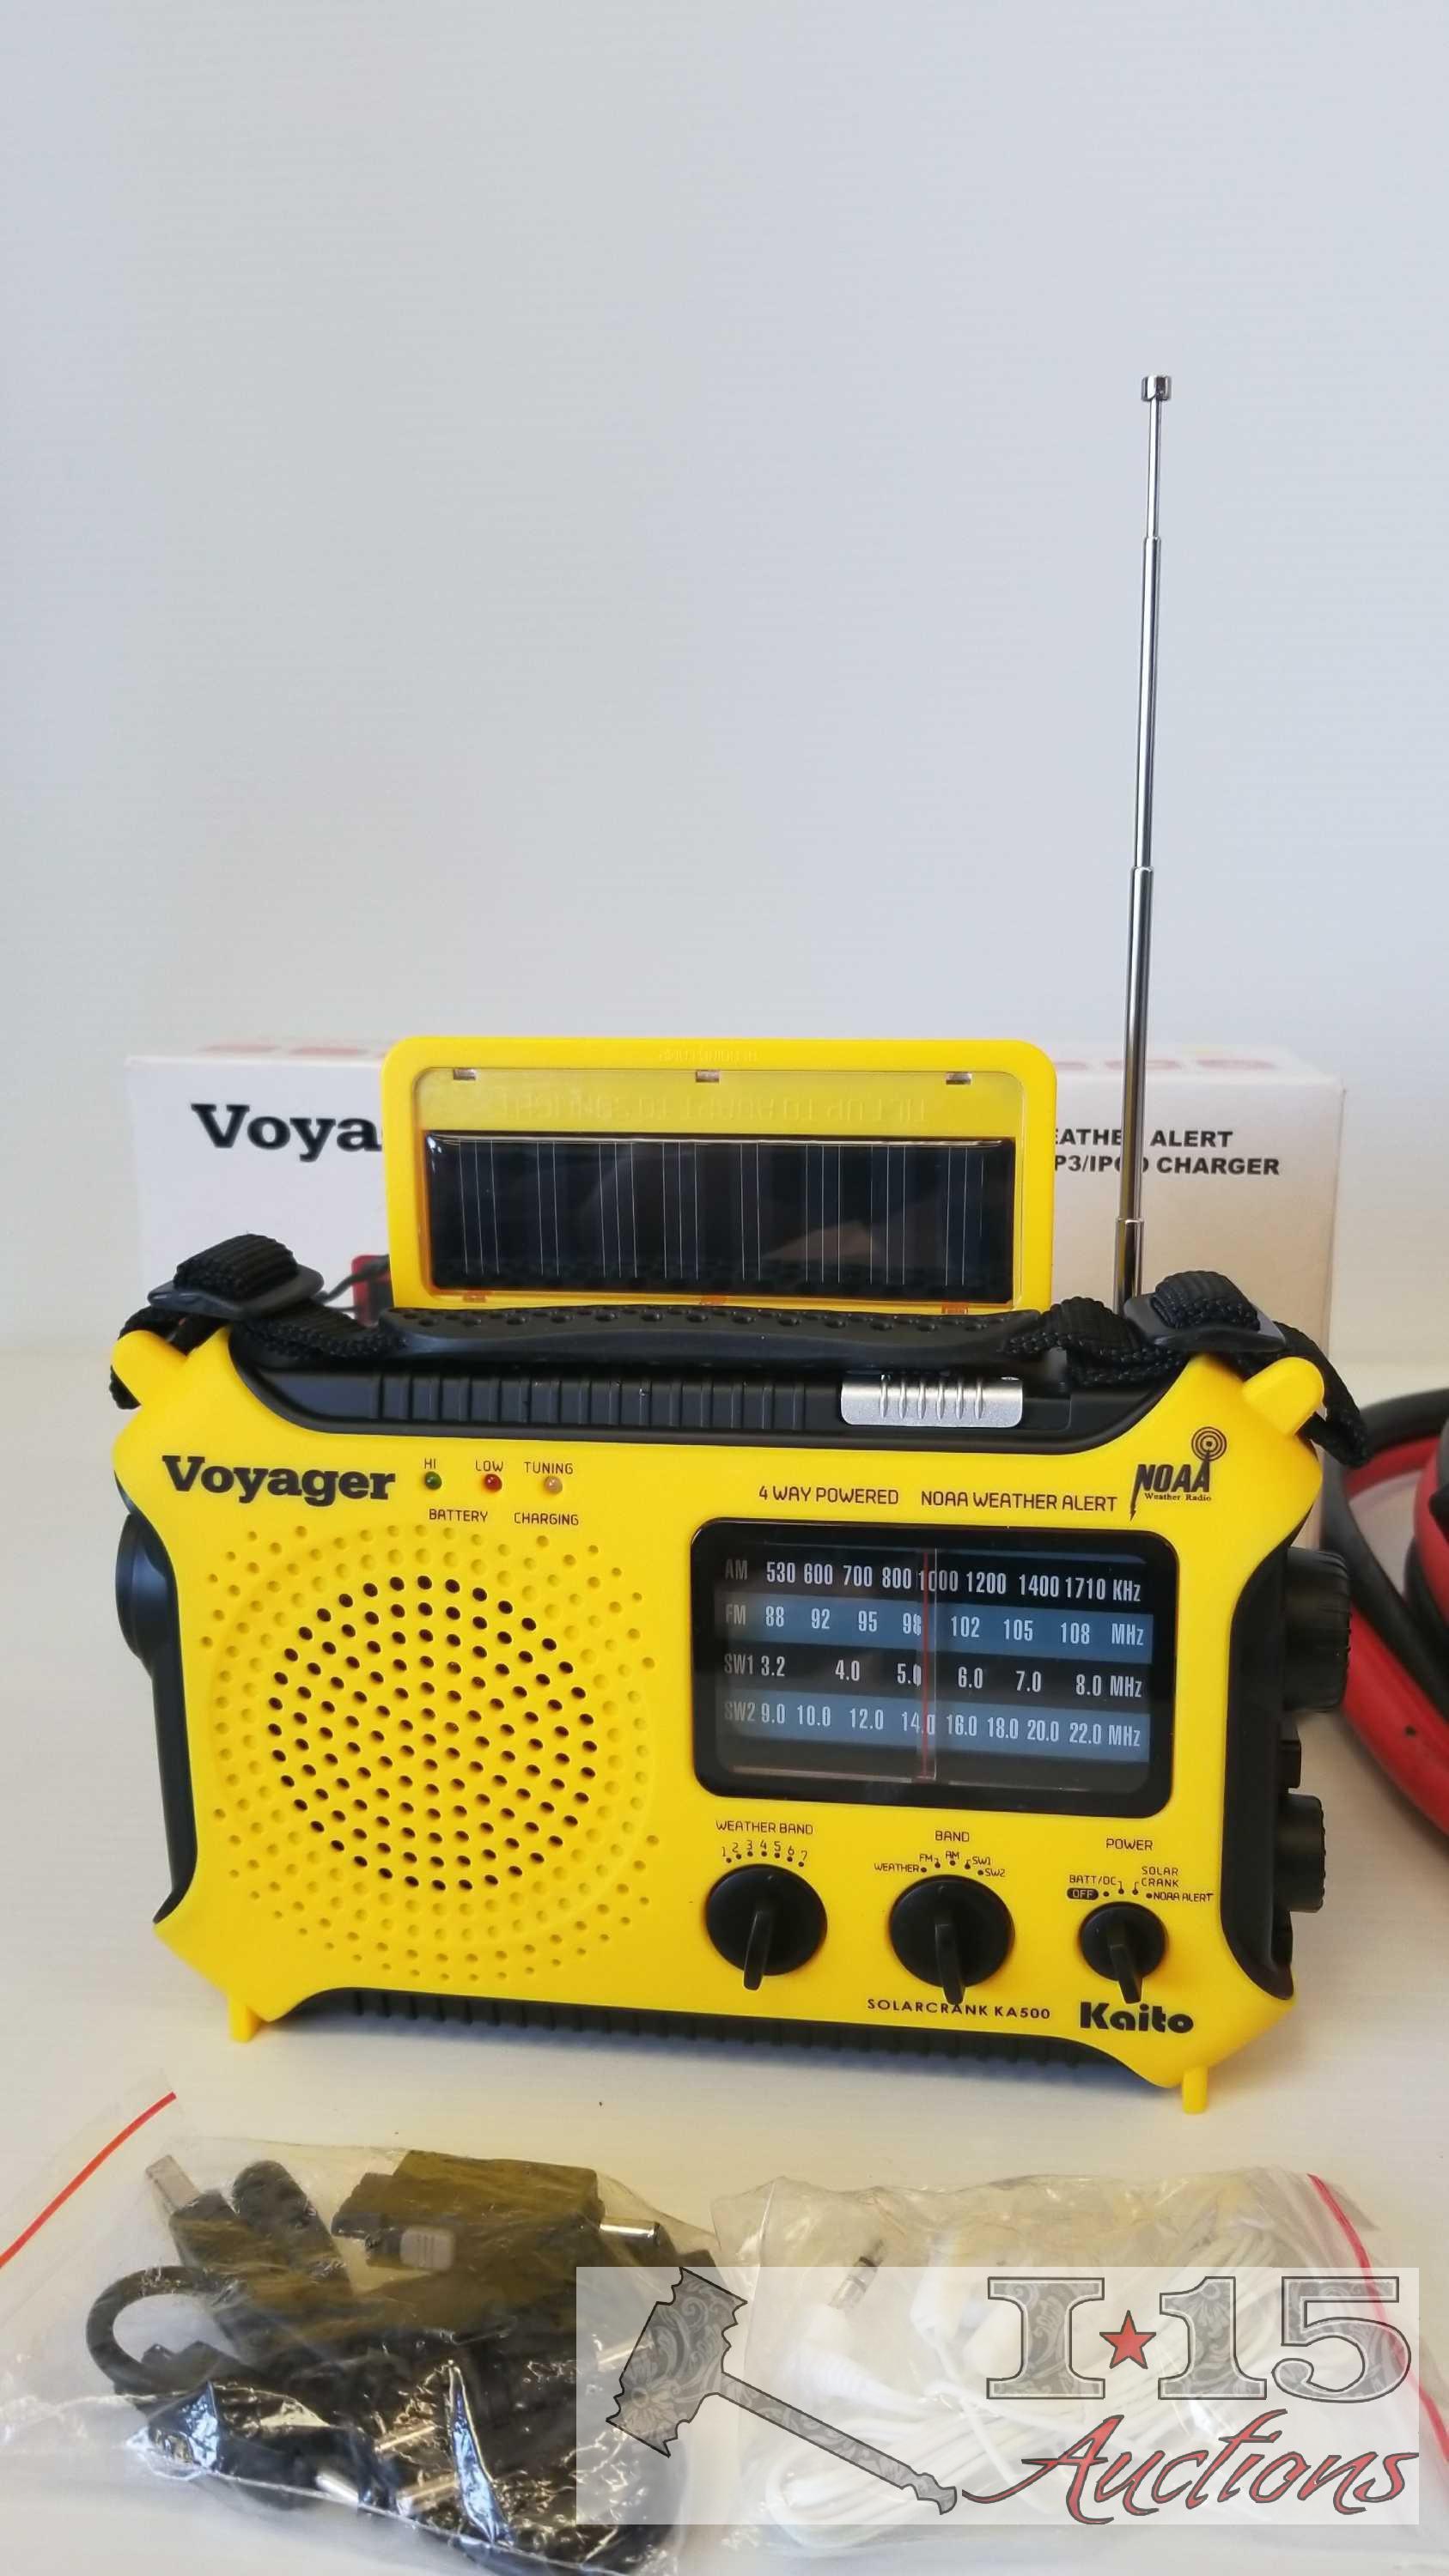 Voyager KA500 and Jumper Cables